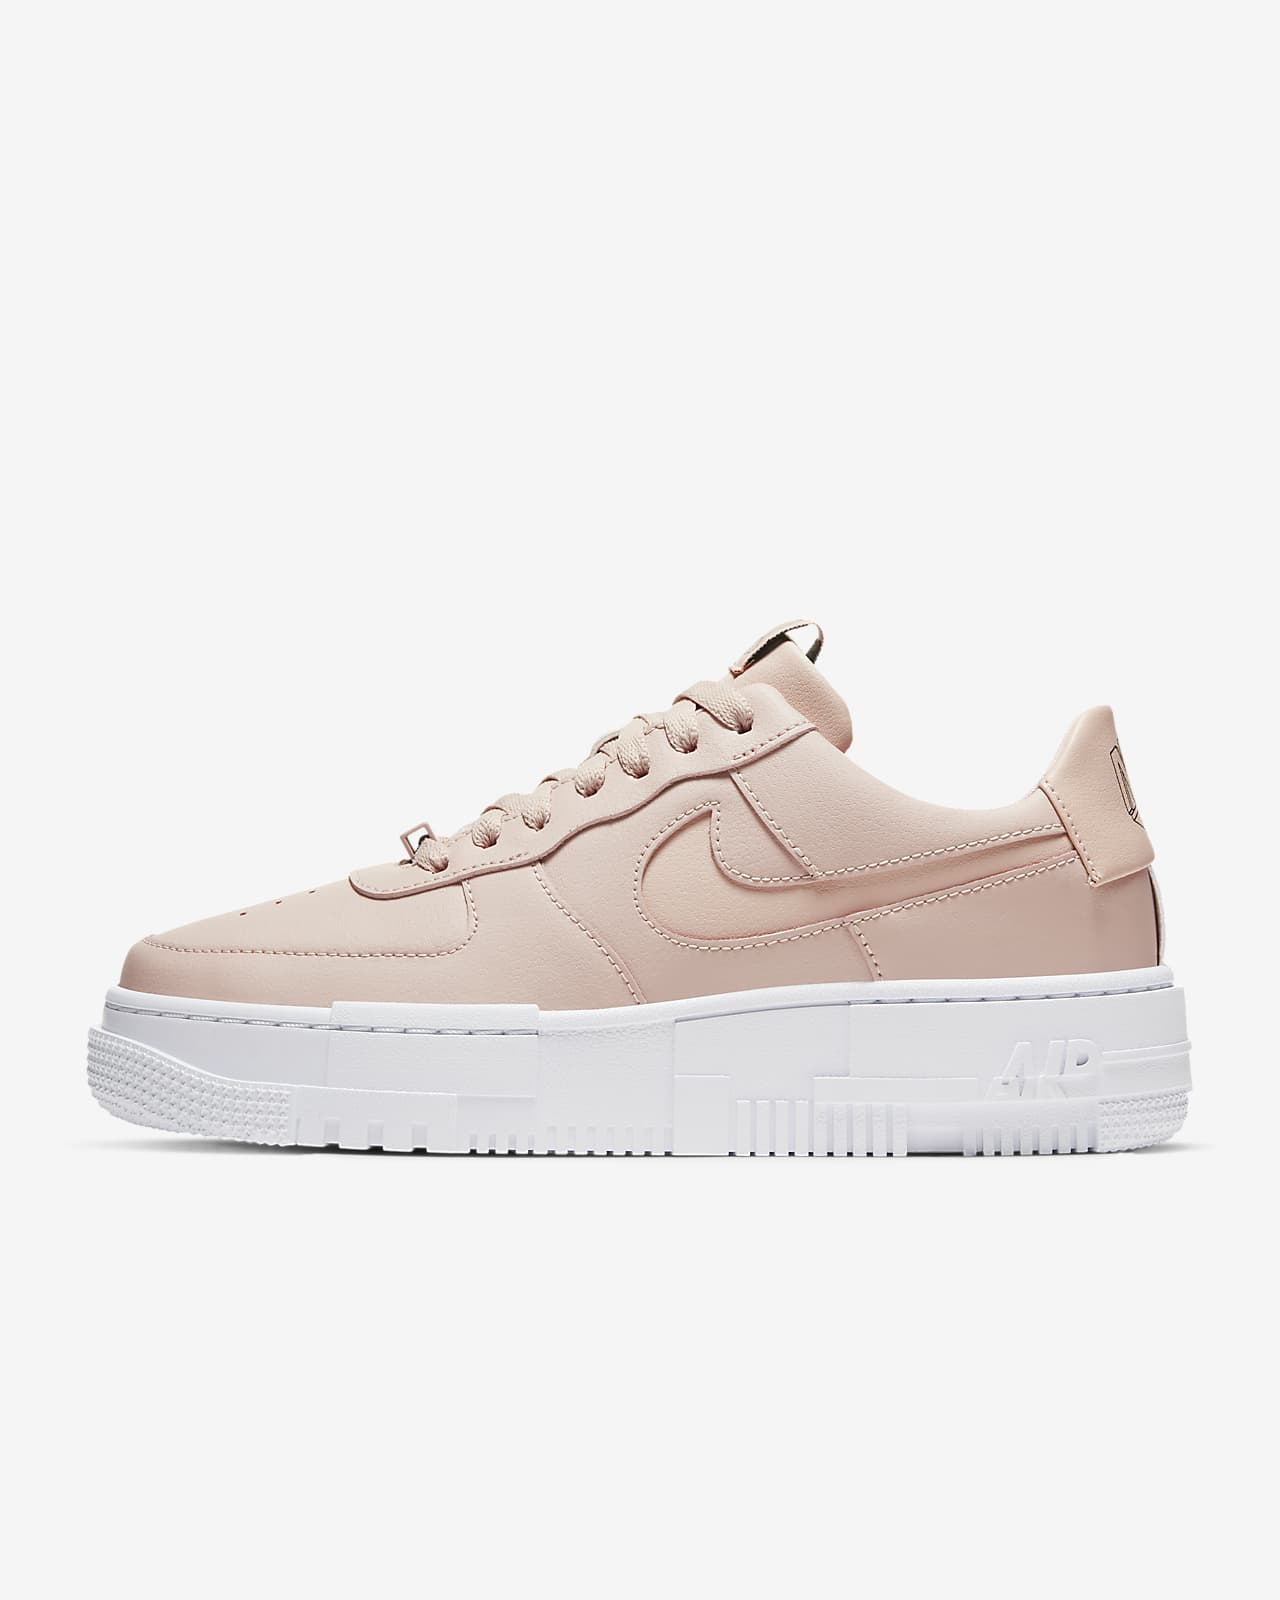 nike air force 1 womens size 8 white